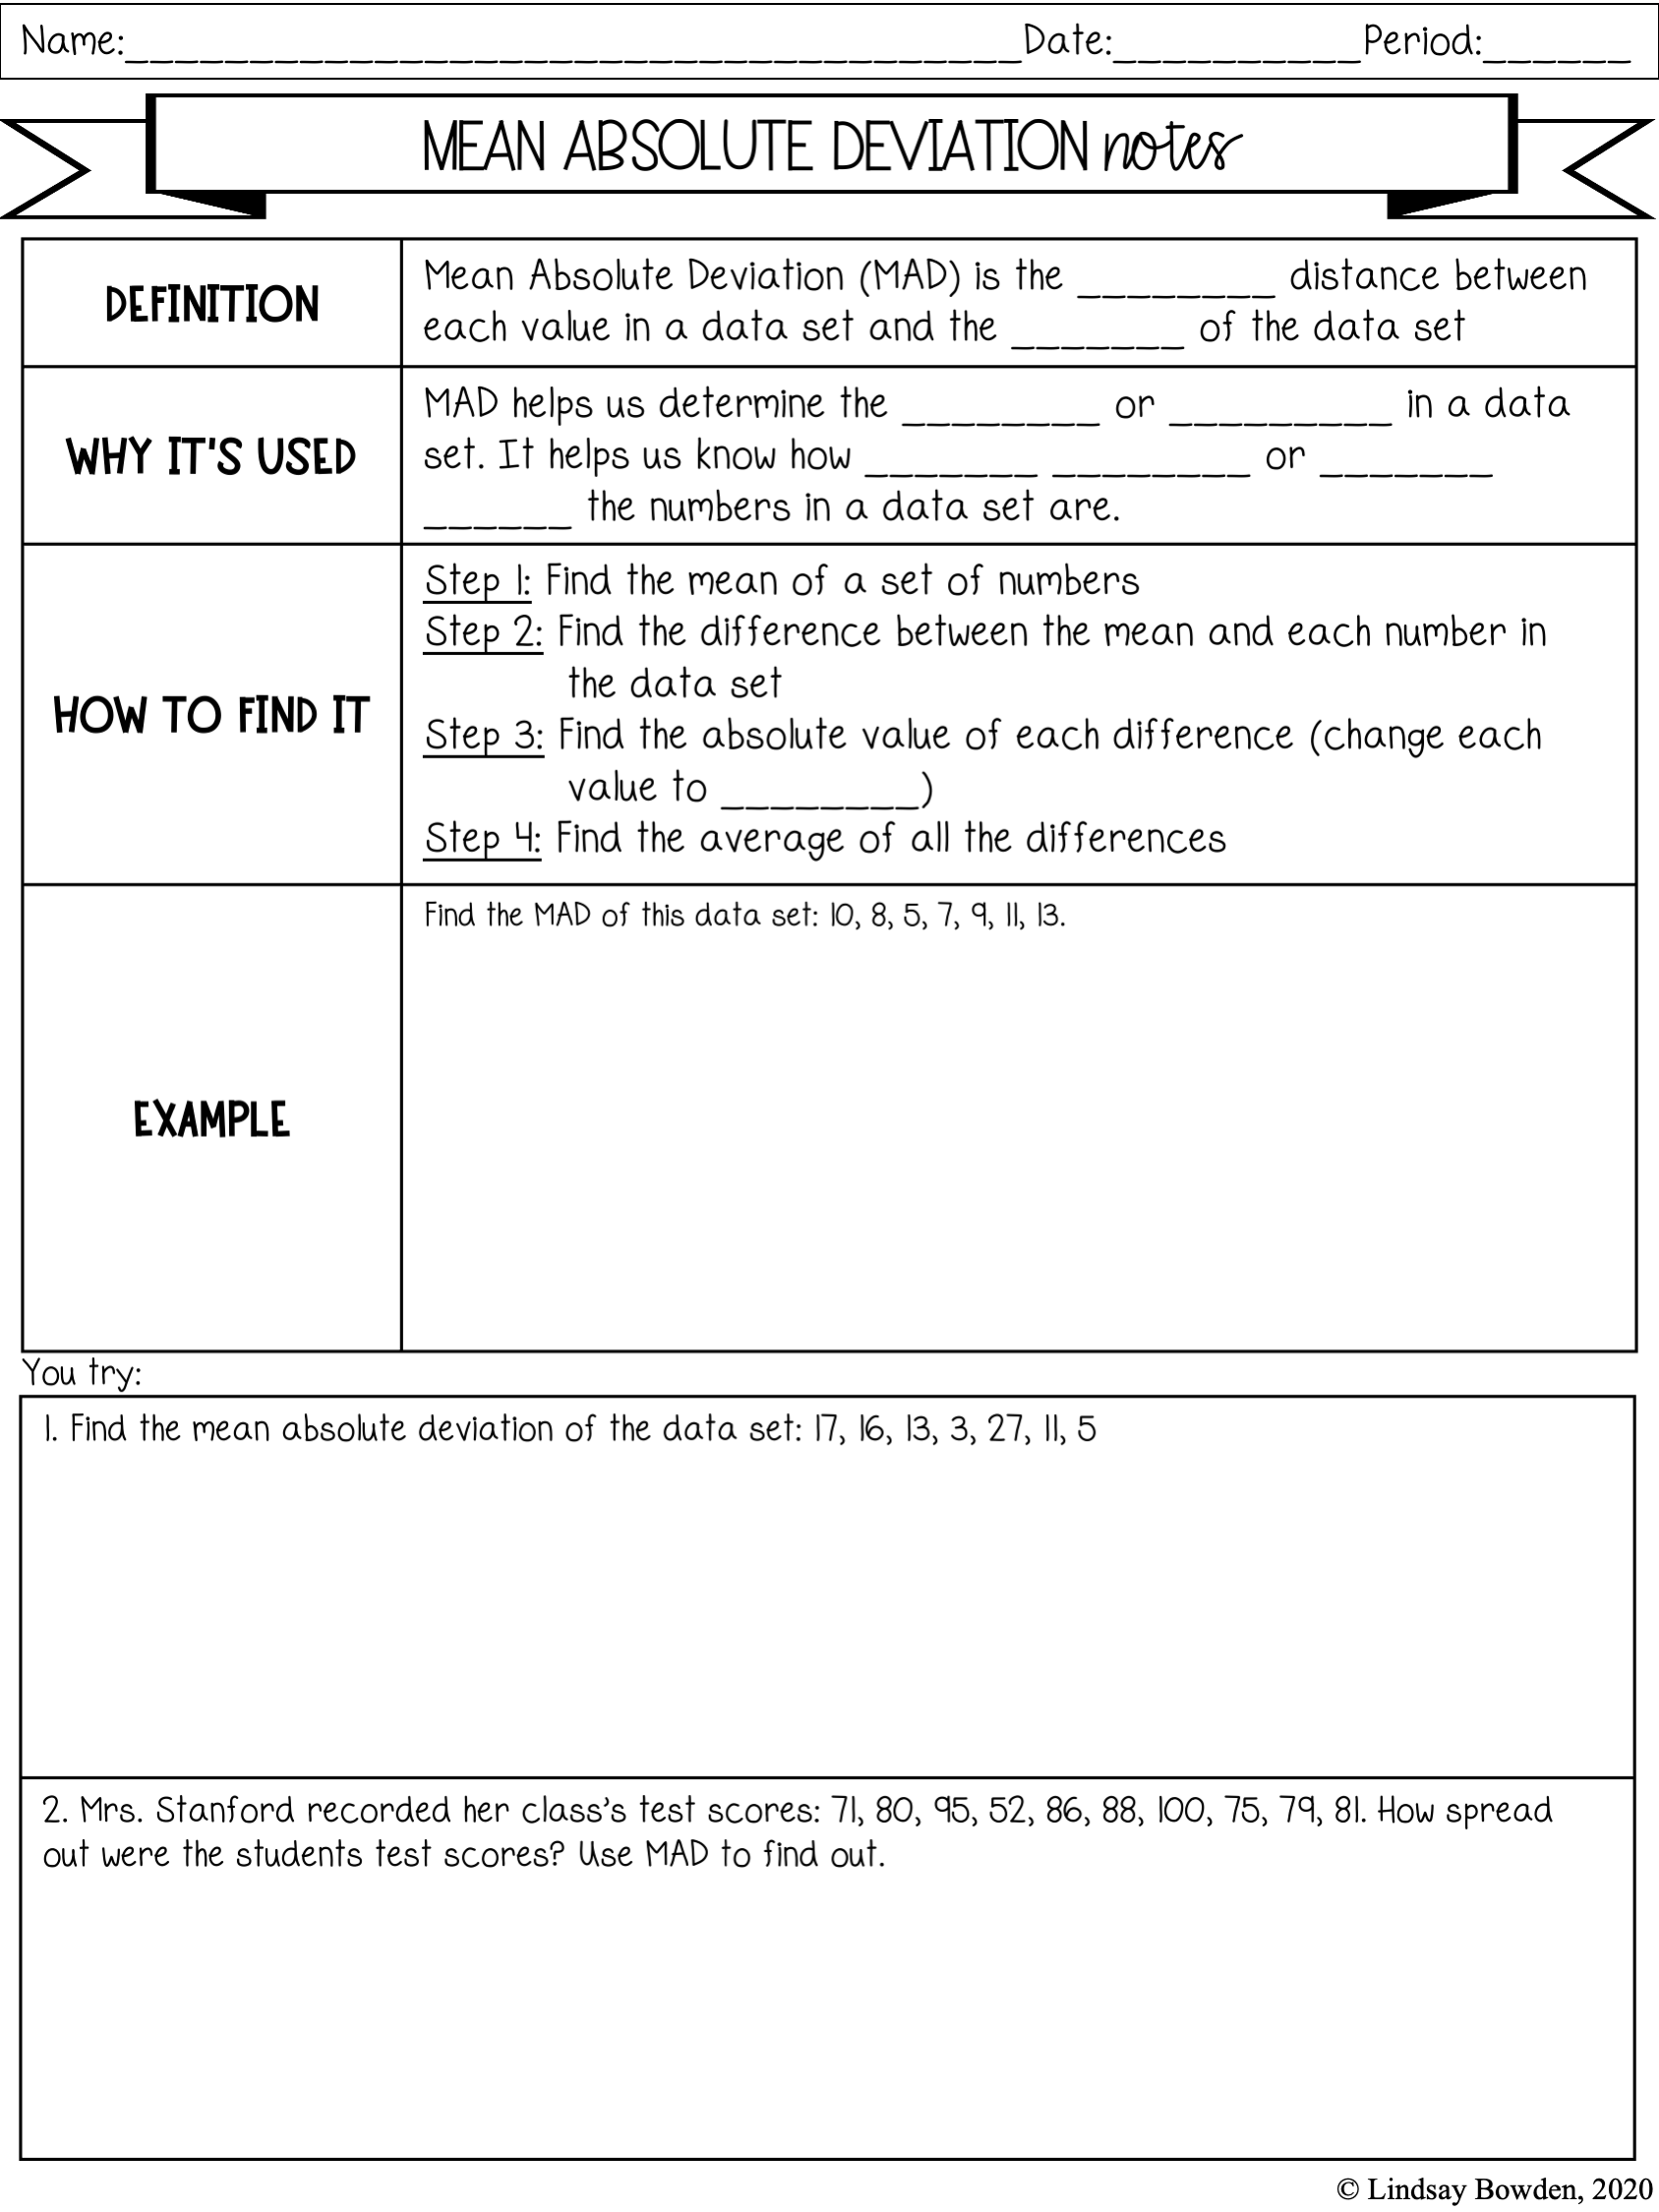 Mean Absolute Value Notes and Worksheets - Lindsay Bowden Within Mean Absolute Deviation Worksheet